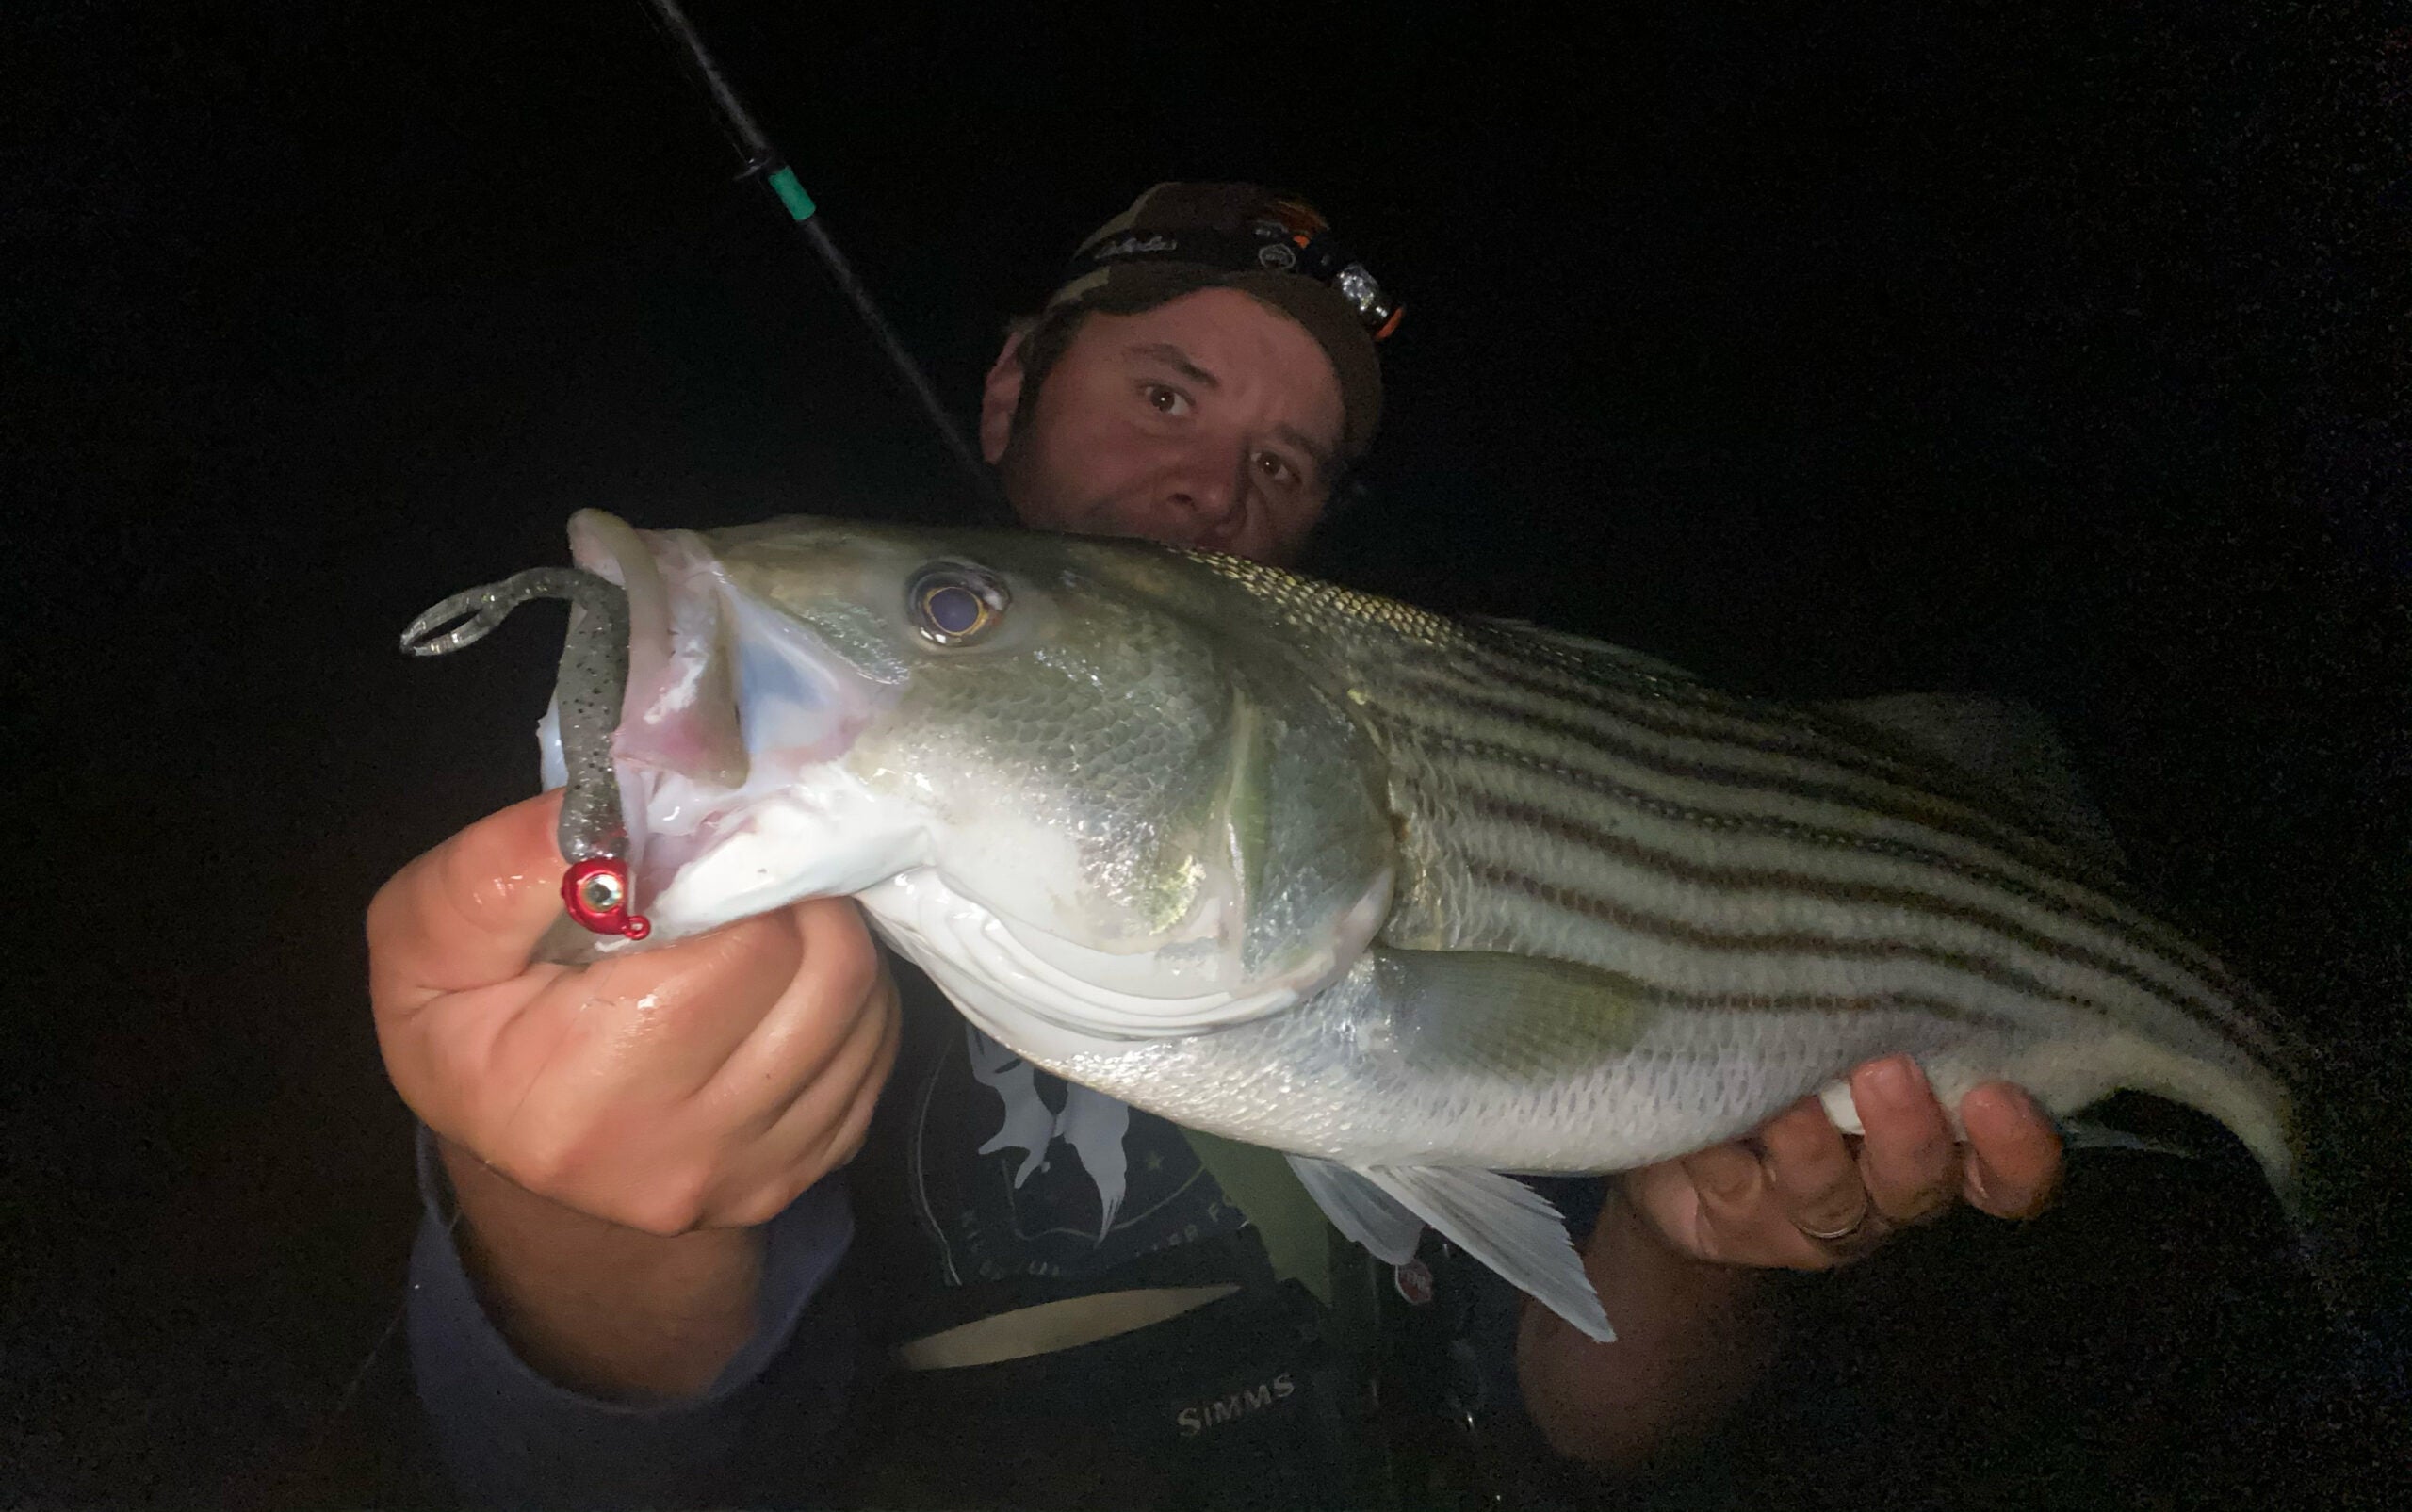 How to Choose Lures for Striper Bass